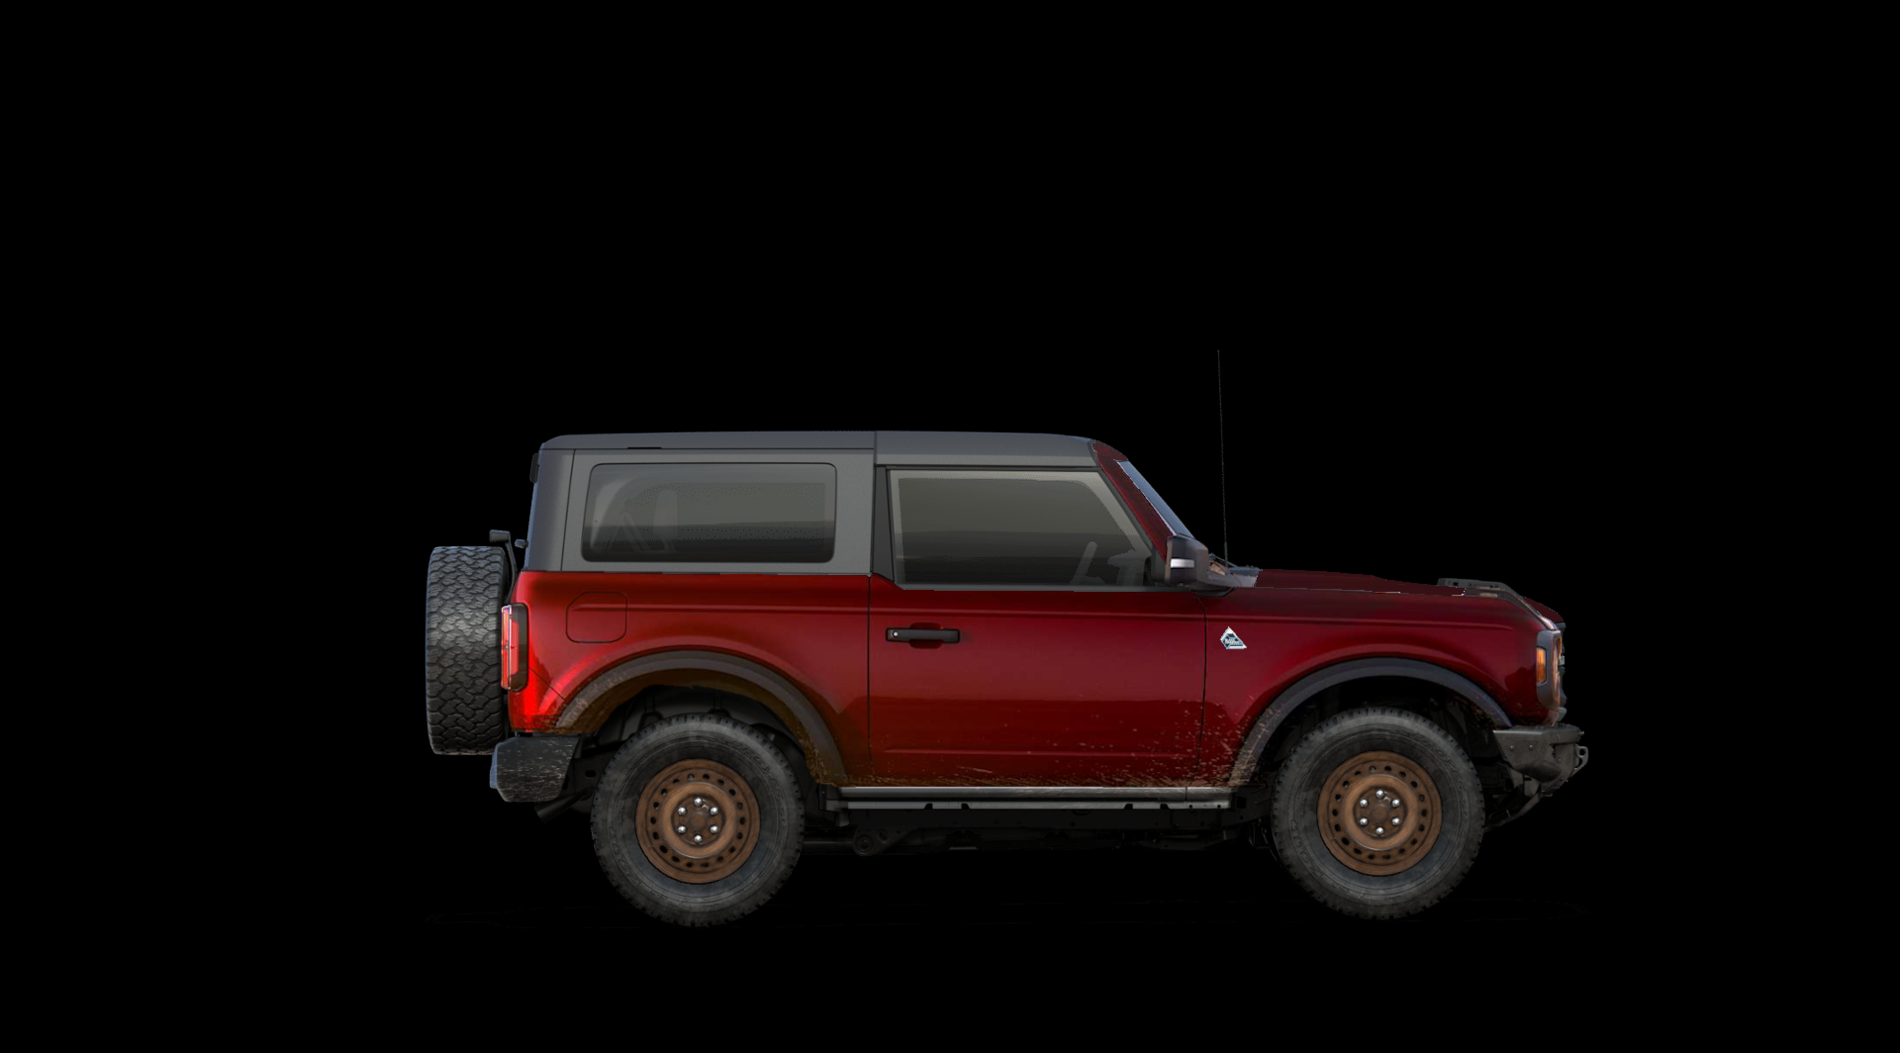 Ford Bronco Black Diamond - renderings from different perspectives rapid_bd_bronzed_steelies